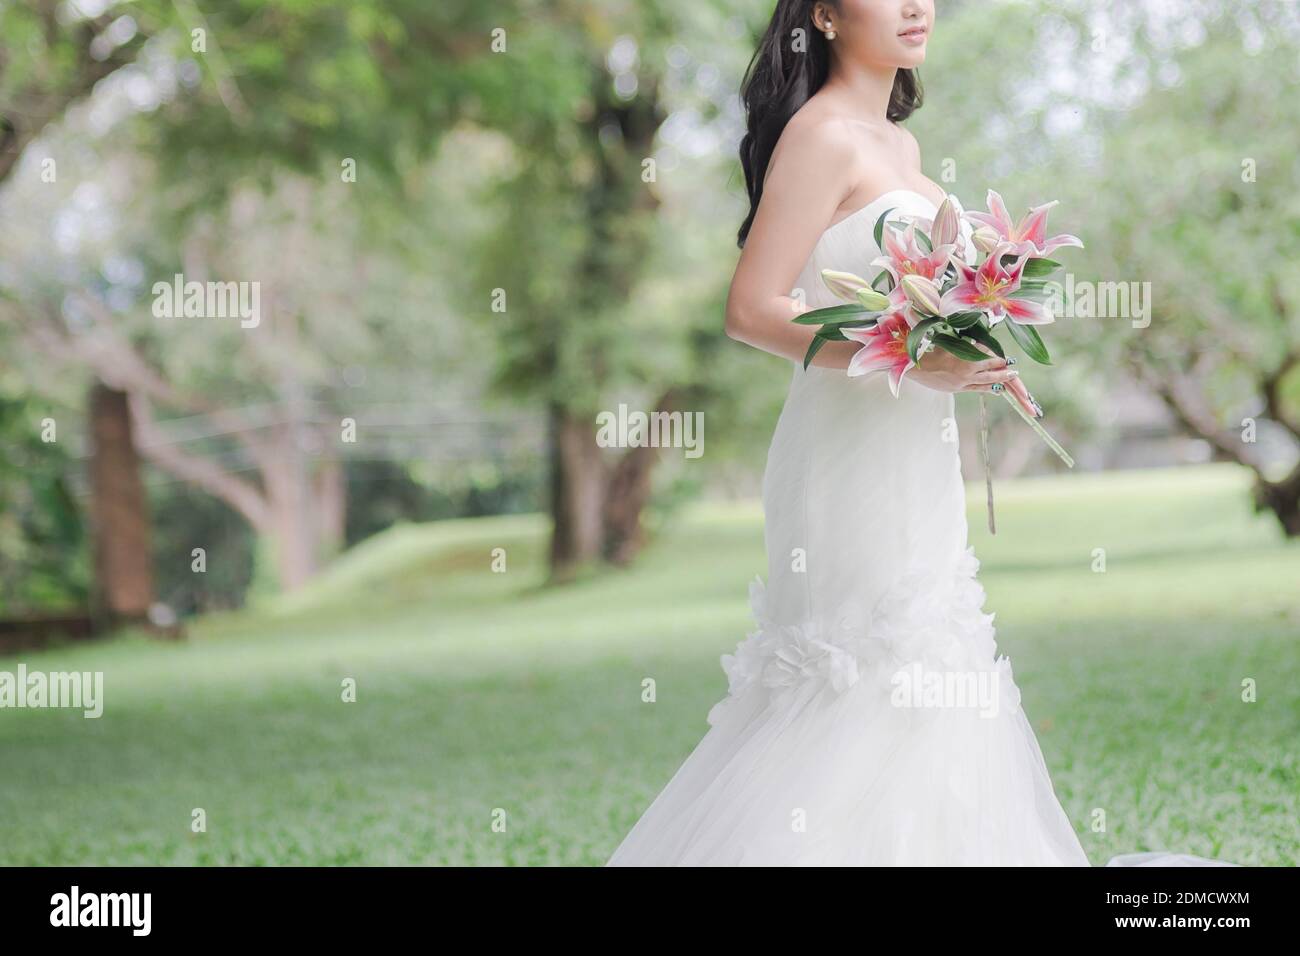 Midsection Of Smiling Bride Holding Flowers While Standing Outdoors Stock Photo